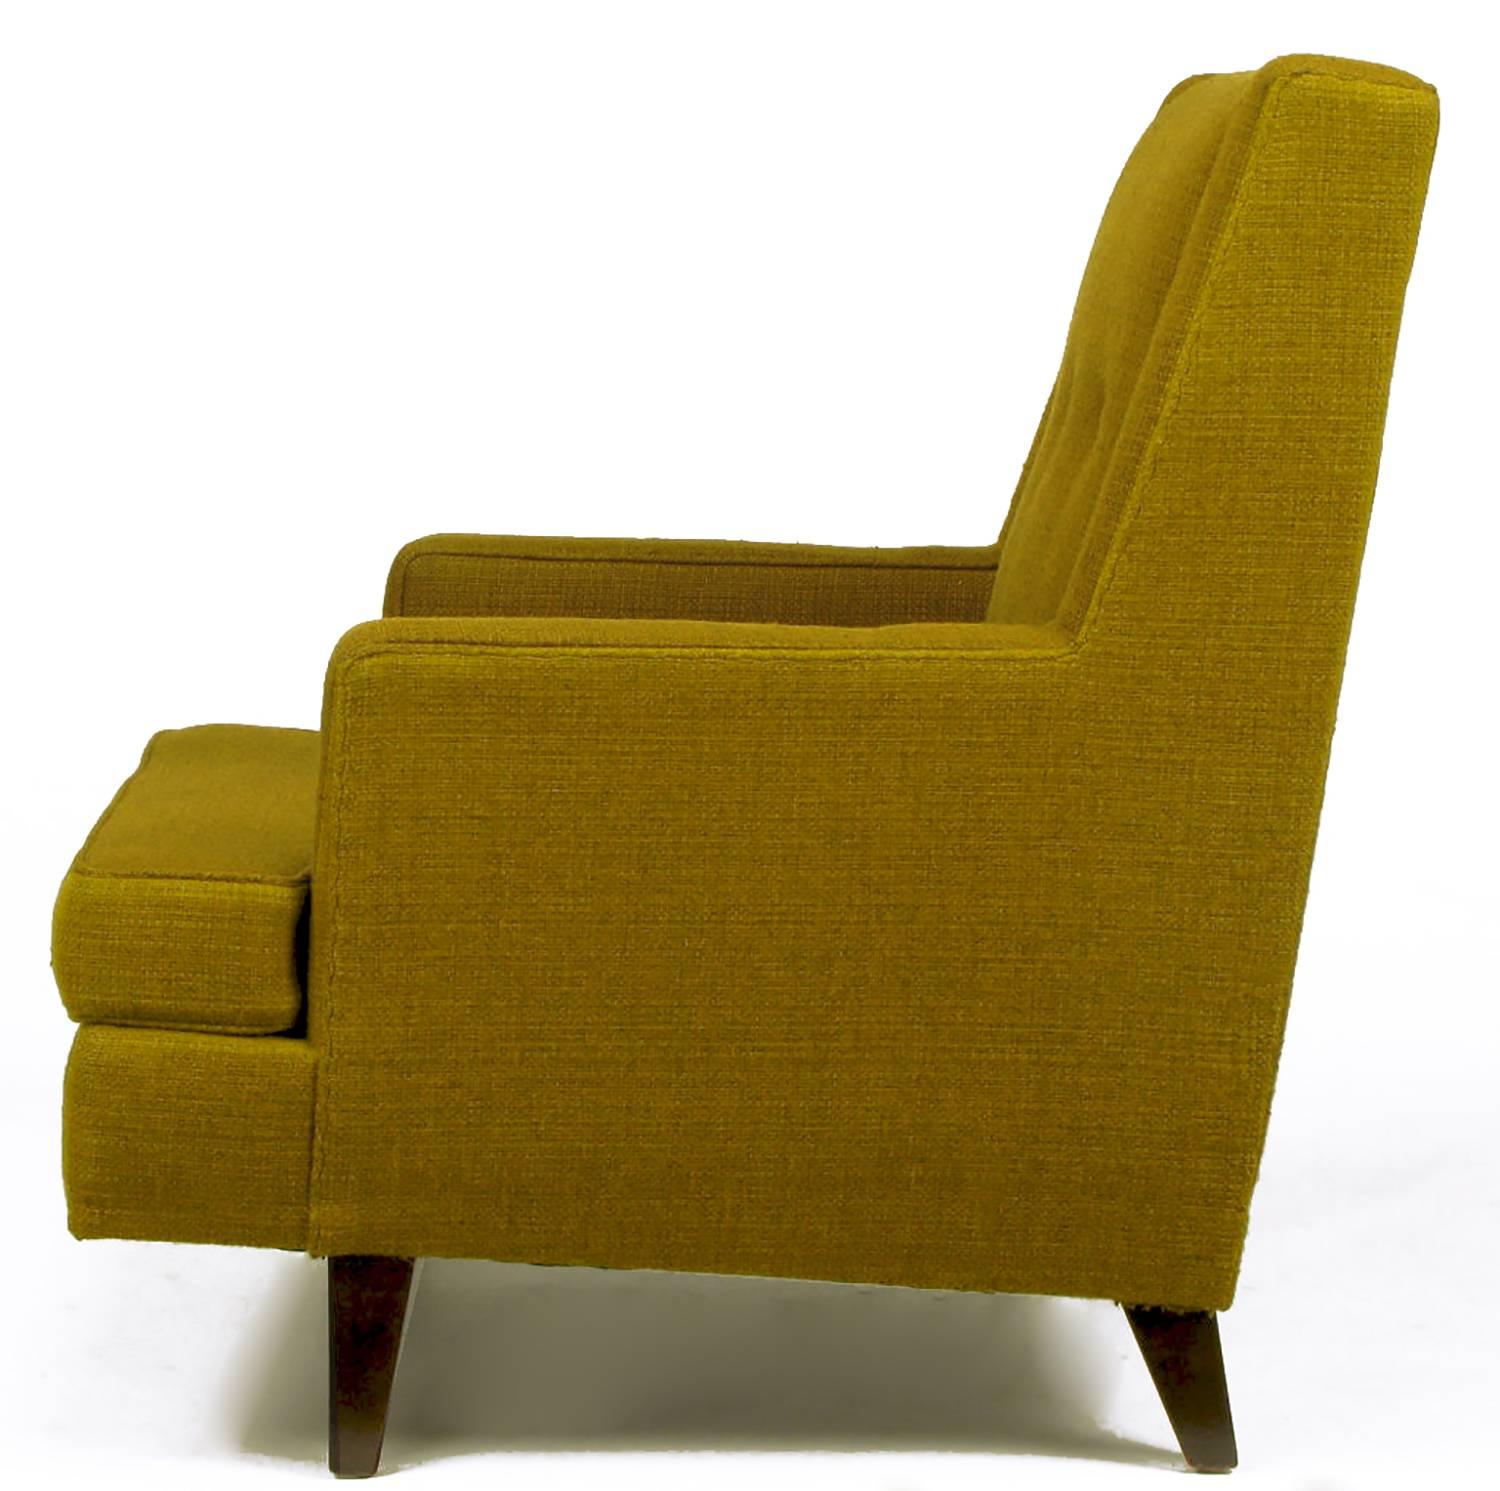 Mid-20th Century Edward Wormley Lounge Chair in Moss Green Wool Upholstery For Sale